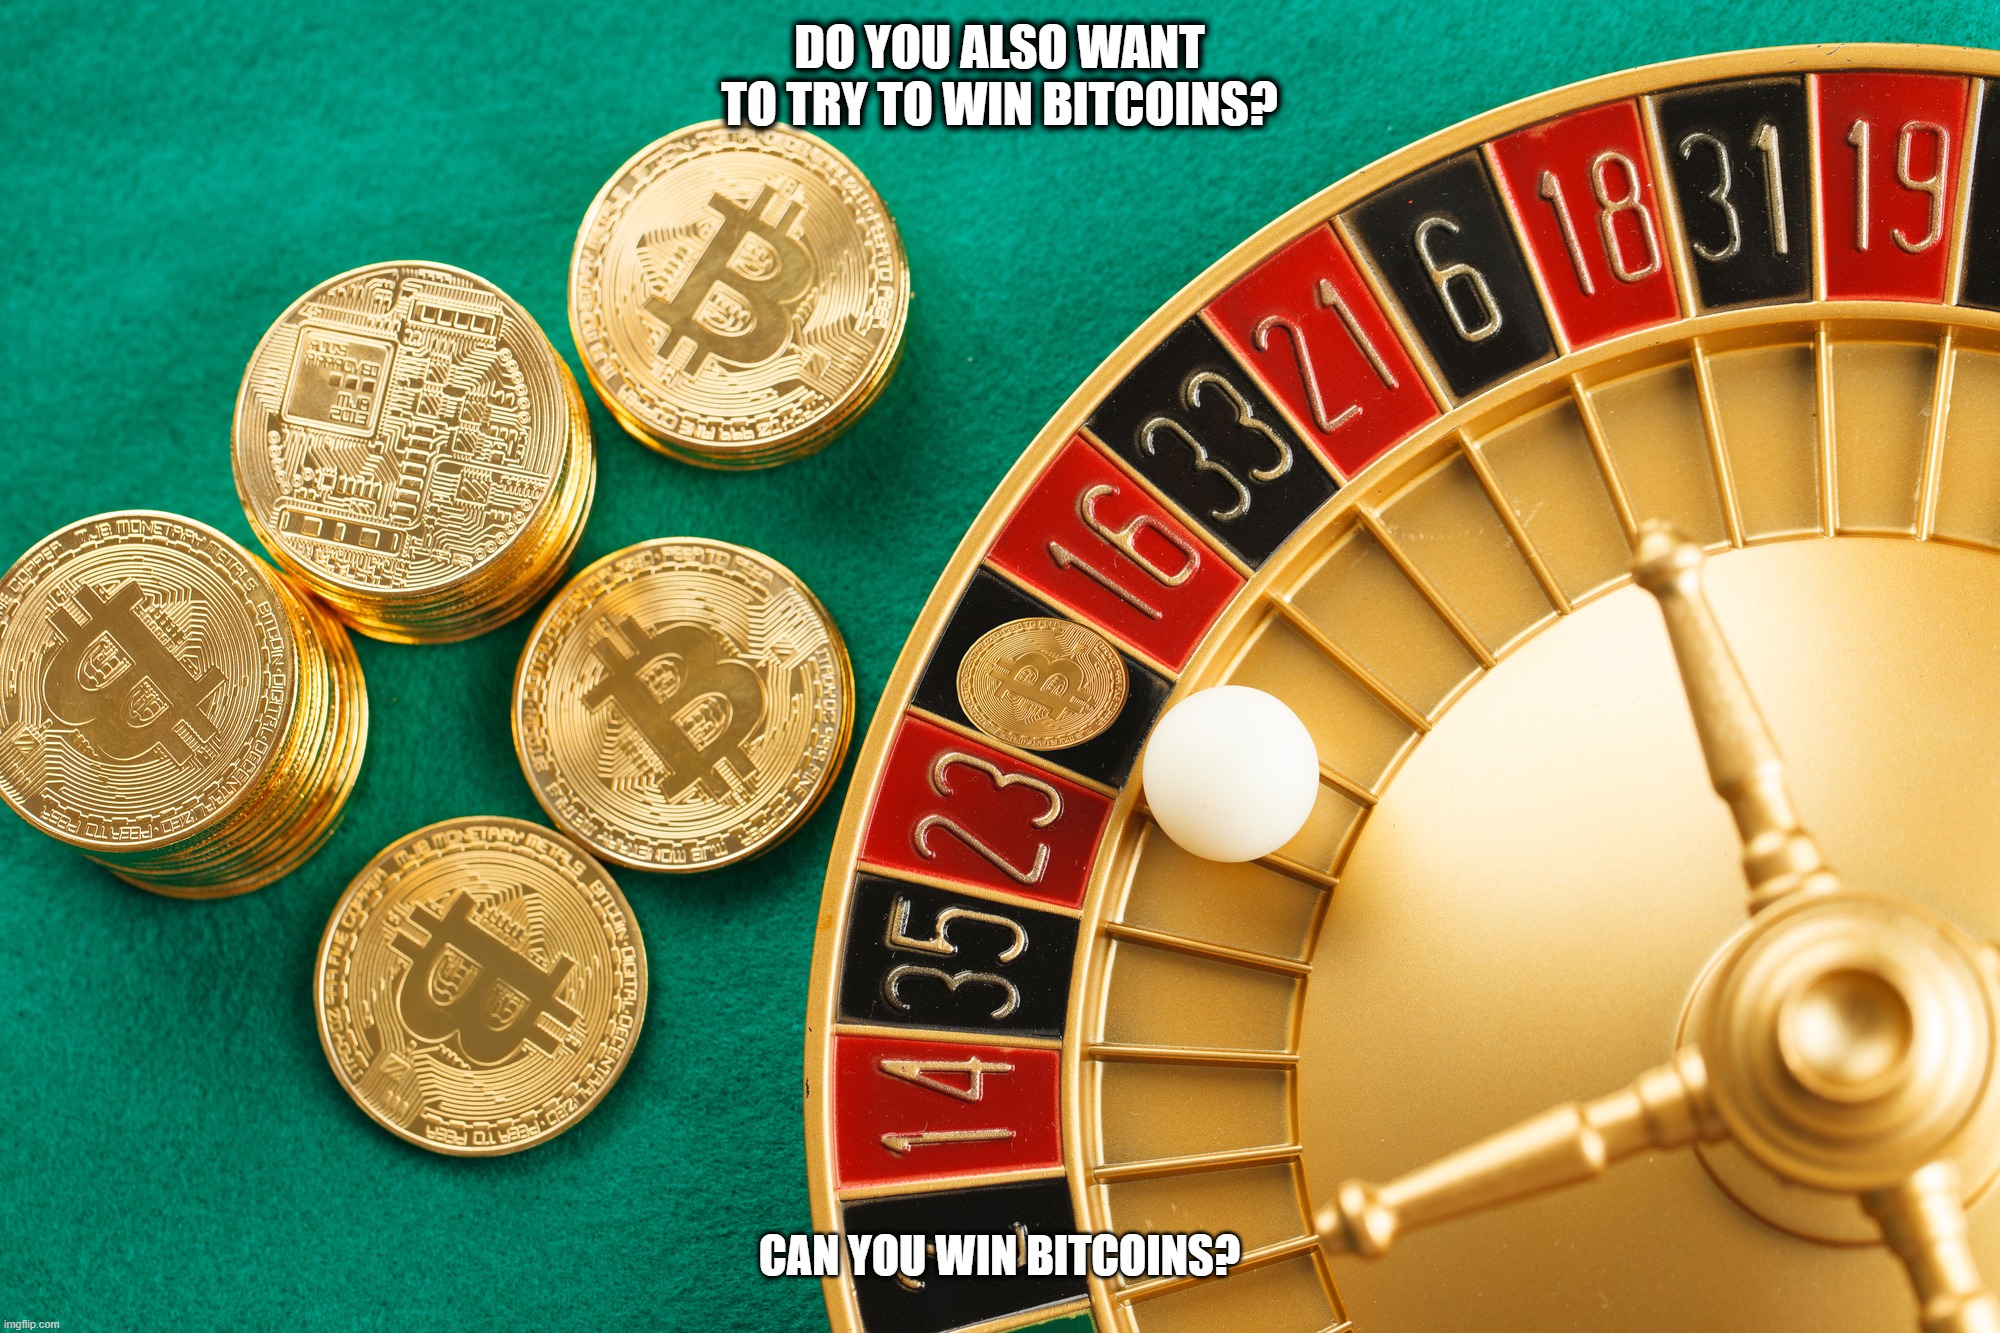 Do you also want to try to win Bitcoins? | DO YOU ALSO WANT TO TRY TO WIN BITCOINS? CAN YOU WIN BITCOINS? | image tagged in casino,gambling,bitcoin,cryptocurrency,crypto,online gaming | made w/ Imgflip meme maker